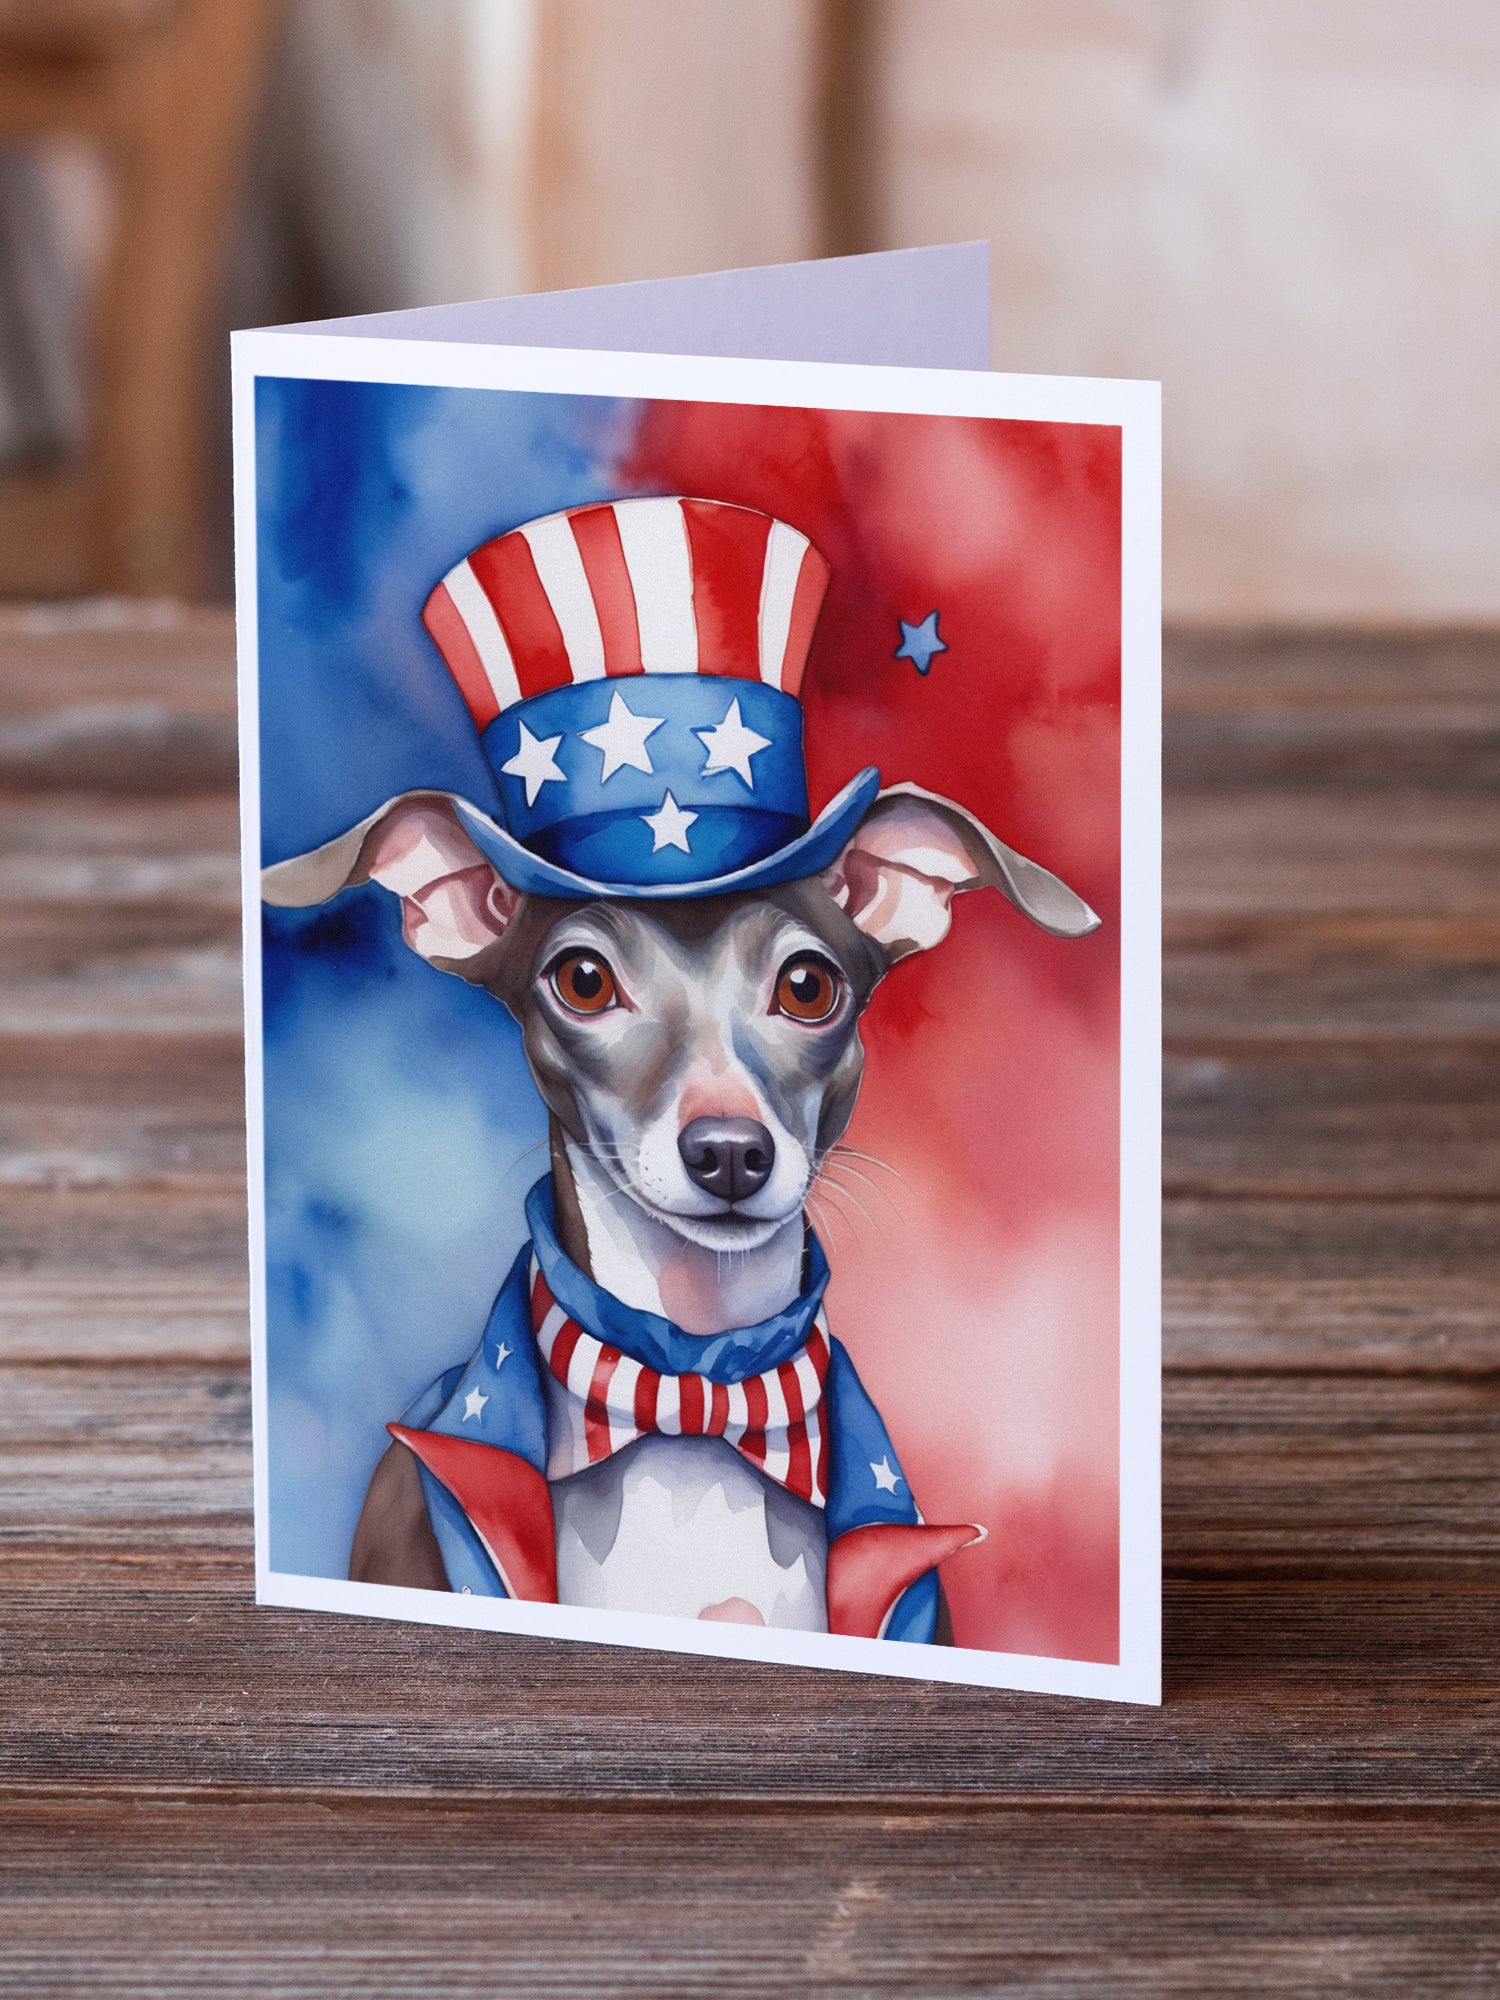 Buy this Italian Greyhound Patriotic American Greeting Cards Pack of 8